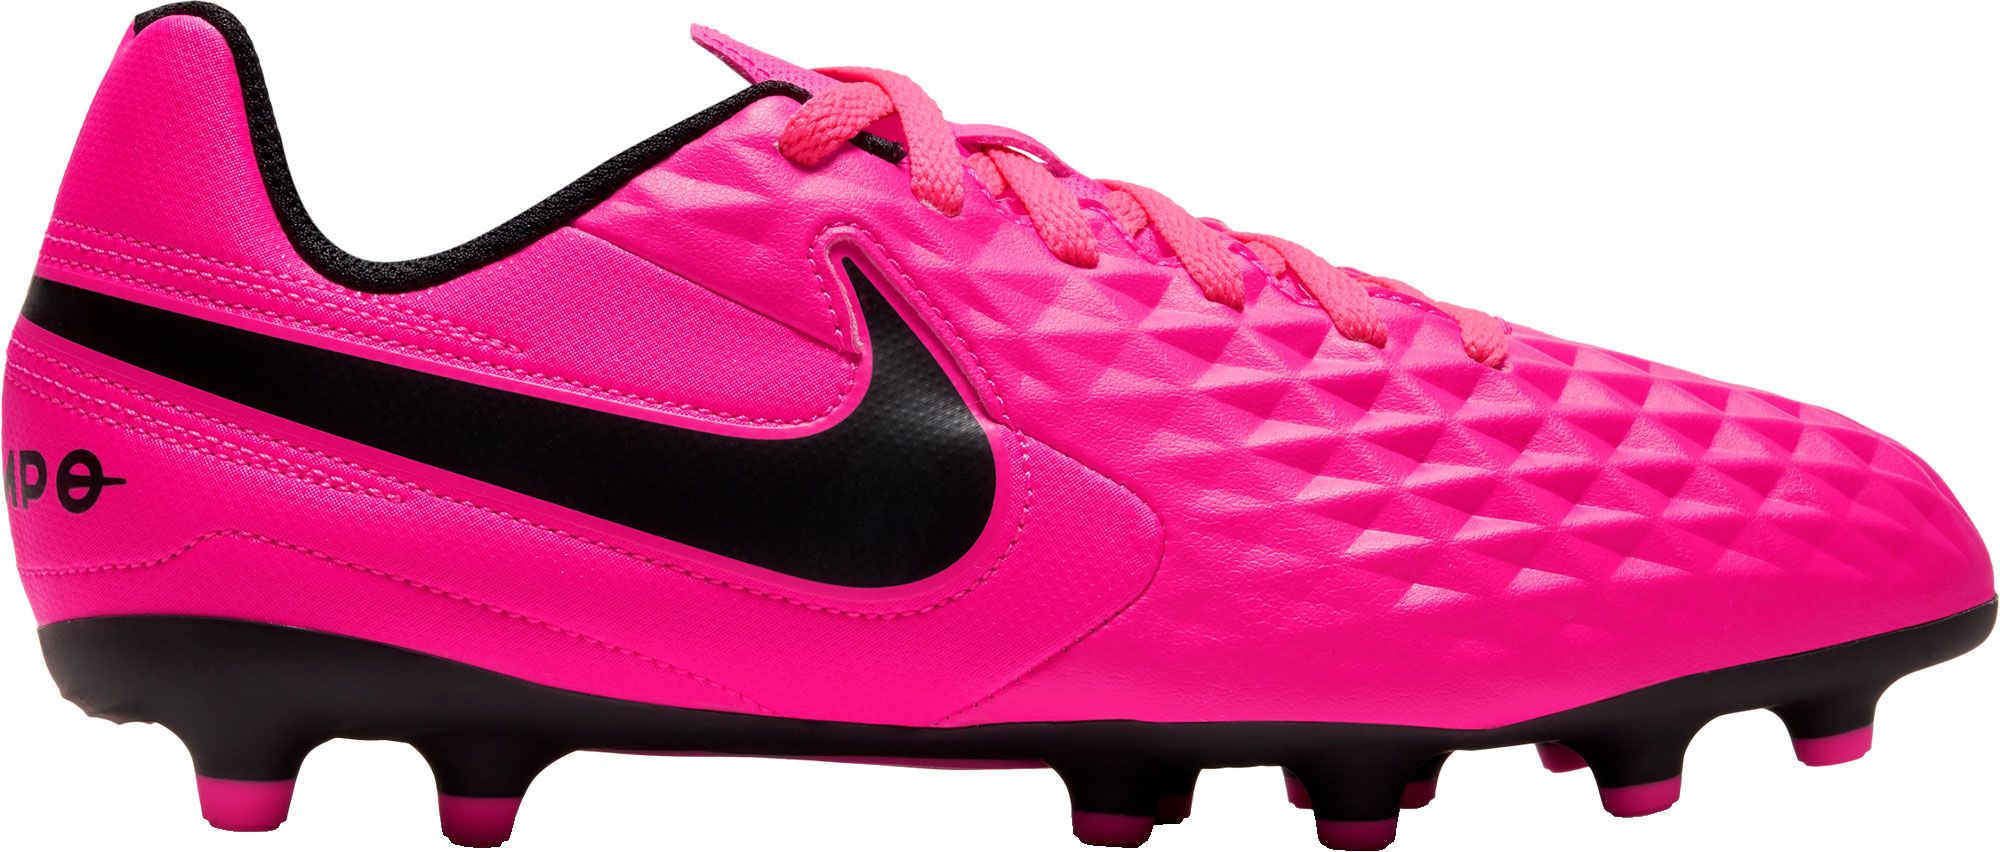 youth girls soccer shoes